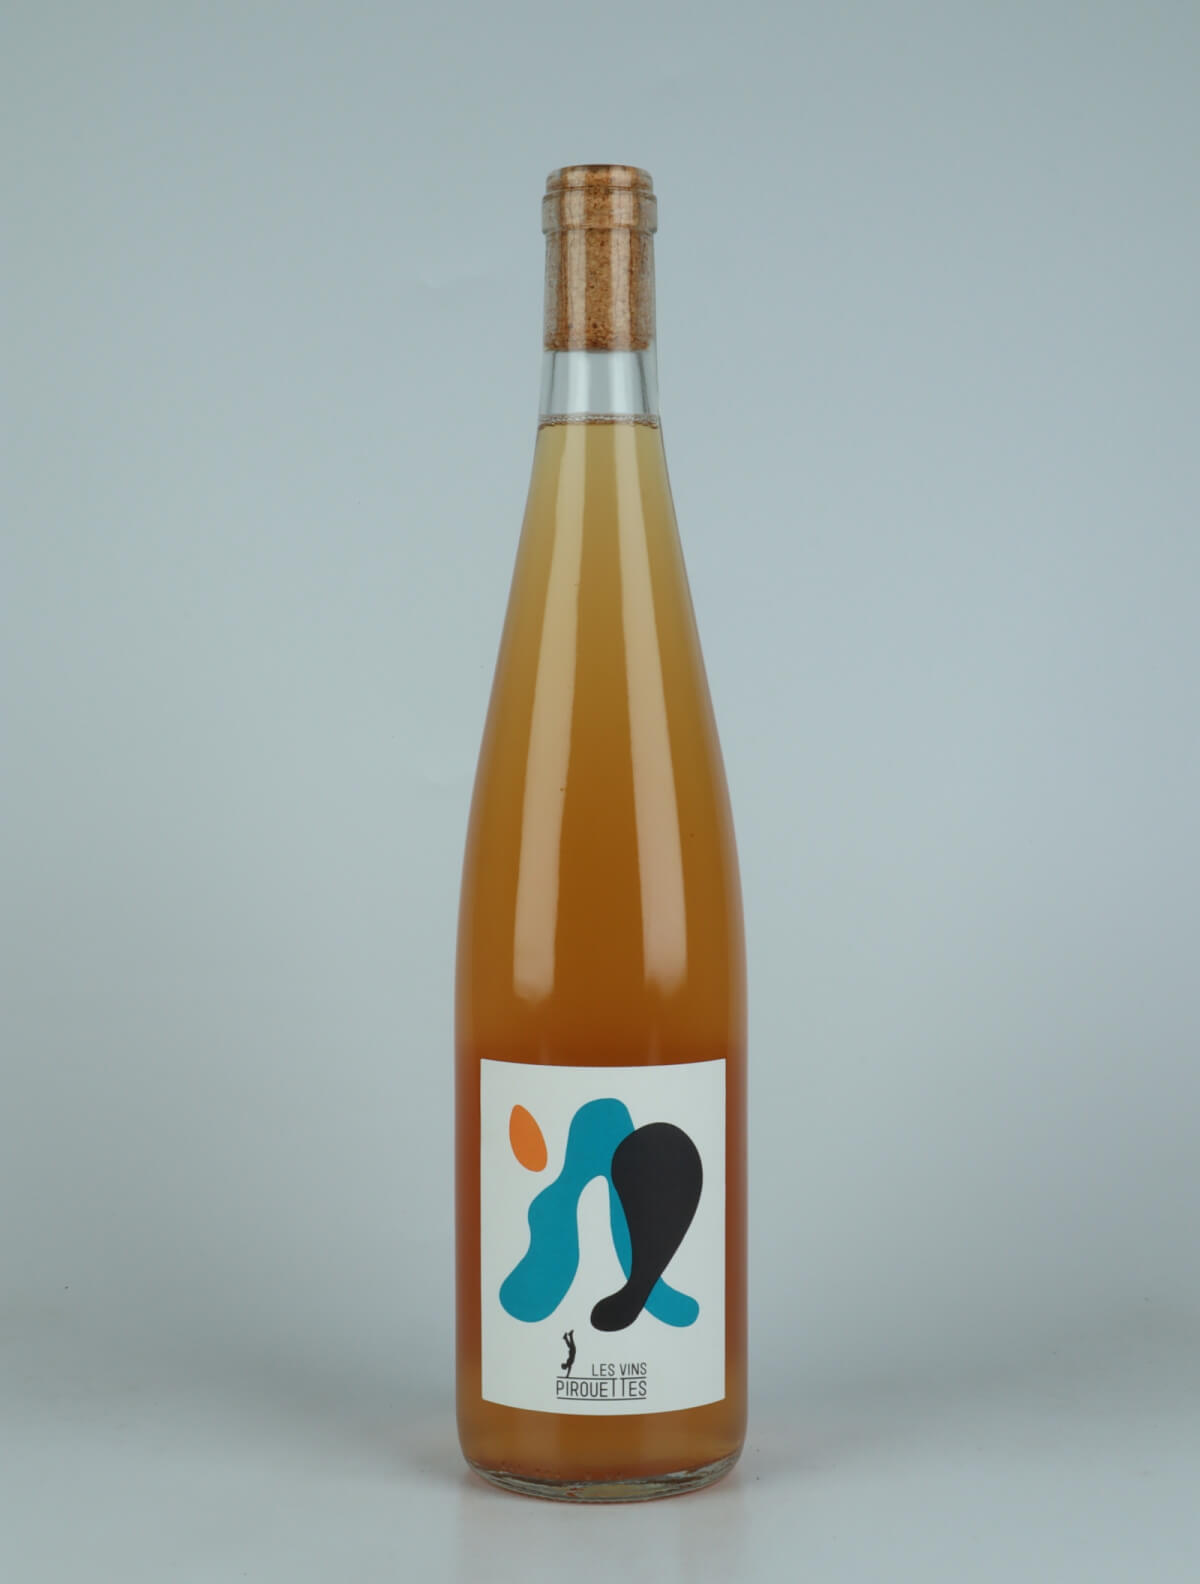 A bottle 2023 Eros Orange wine from Les Vins Pirouettes, Alsace in France